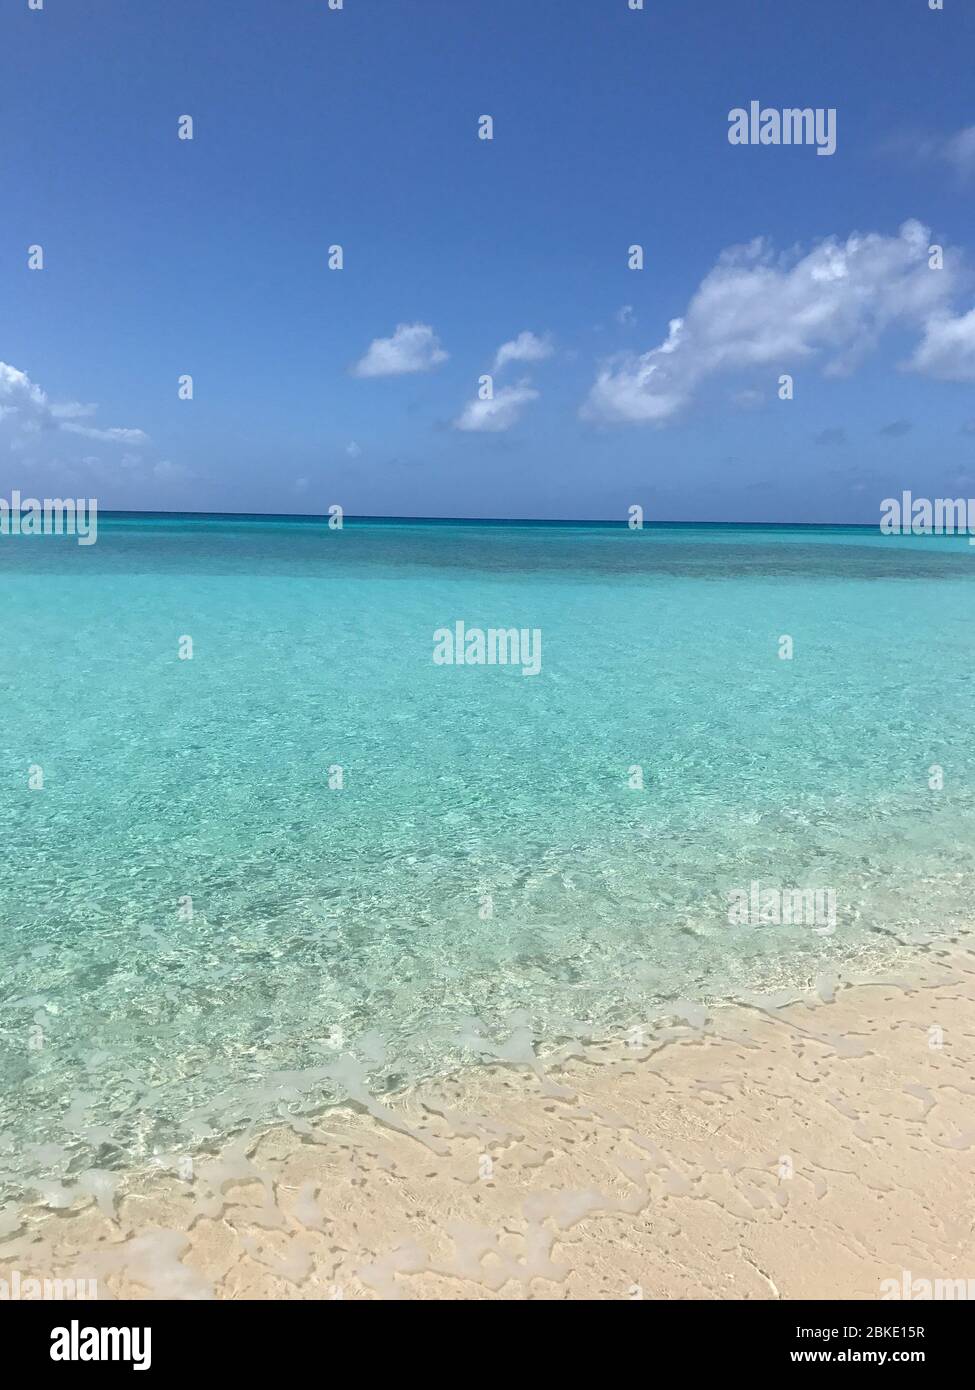 Clear blue Caribbean Sea view from Seven Mile Beach in Grand Cayman, Cayman Islands. Stock Photo